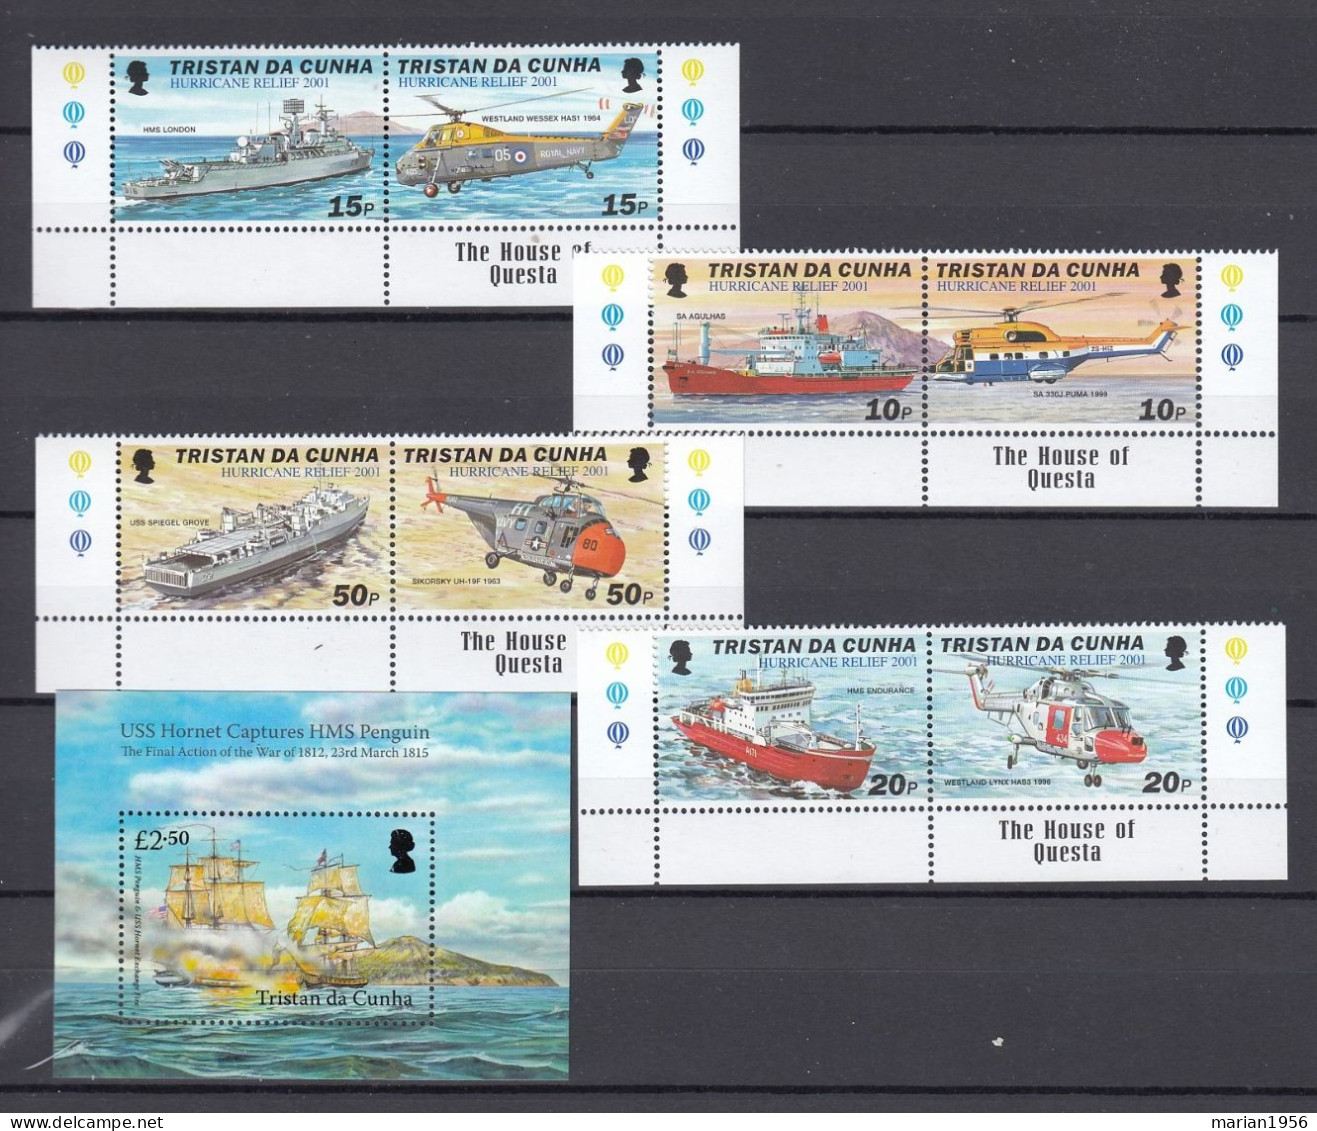 Tristan Da Cunha - Transport - NAVIRE,HELICOPTERES,BATEAUX - Mich.695/02 + BF - 35 Eur. - MNH - Andere(Zee)